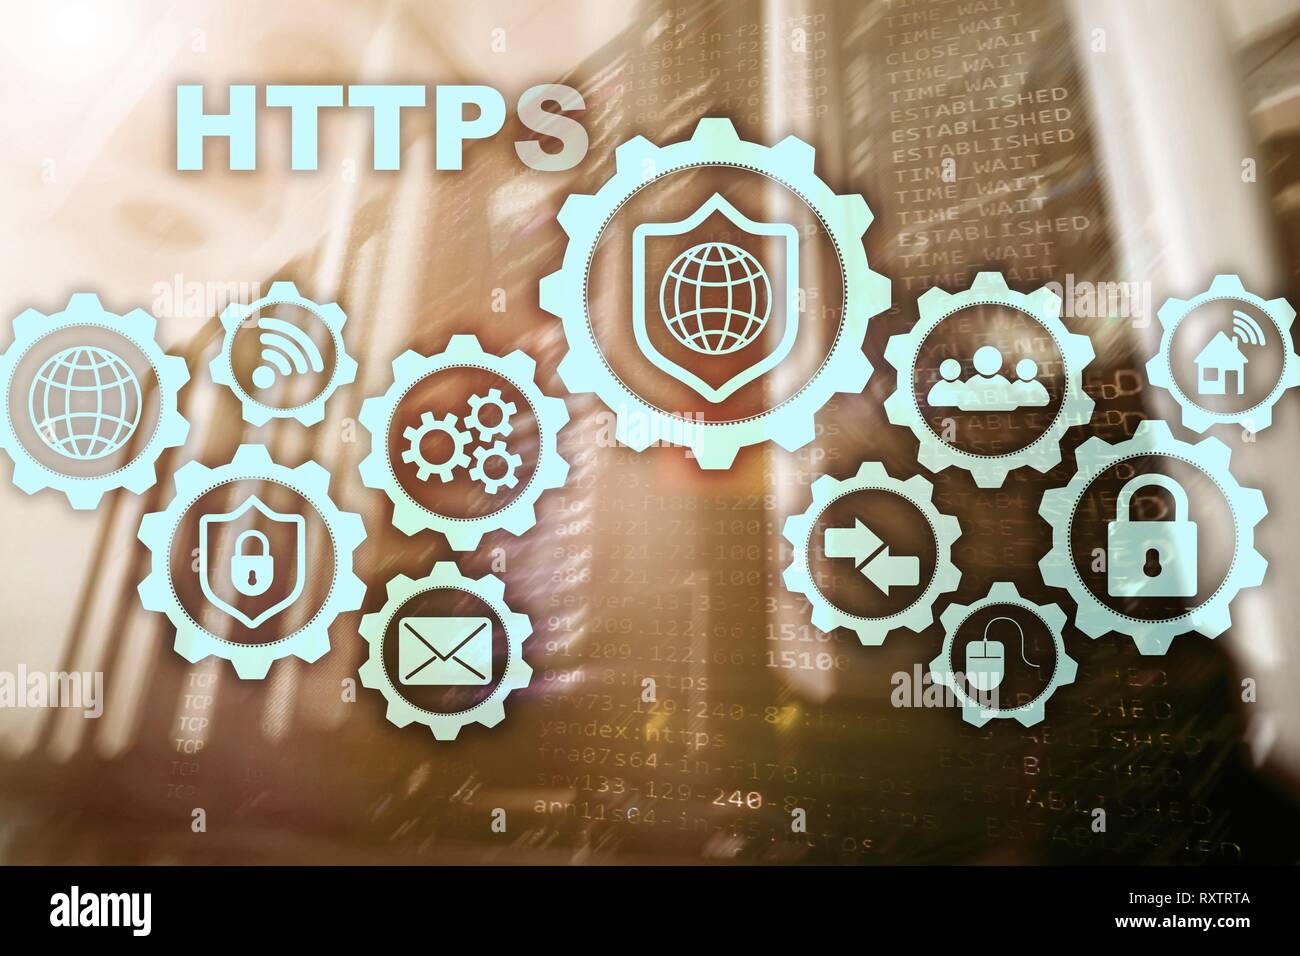 HTTPS. Hypertext Transport Protocol Secure. Technology Concept on Server Room Background. Virtual Icon for network security web service. Stock Photo